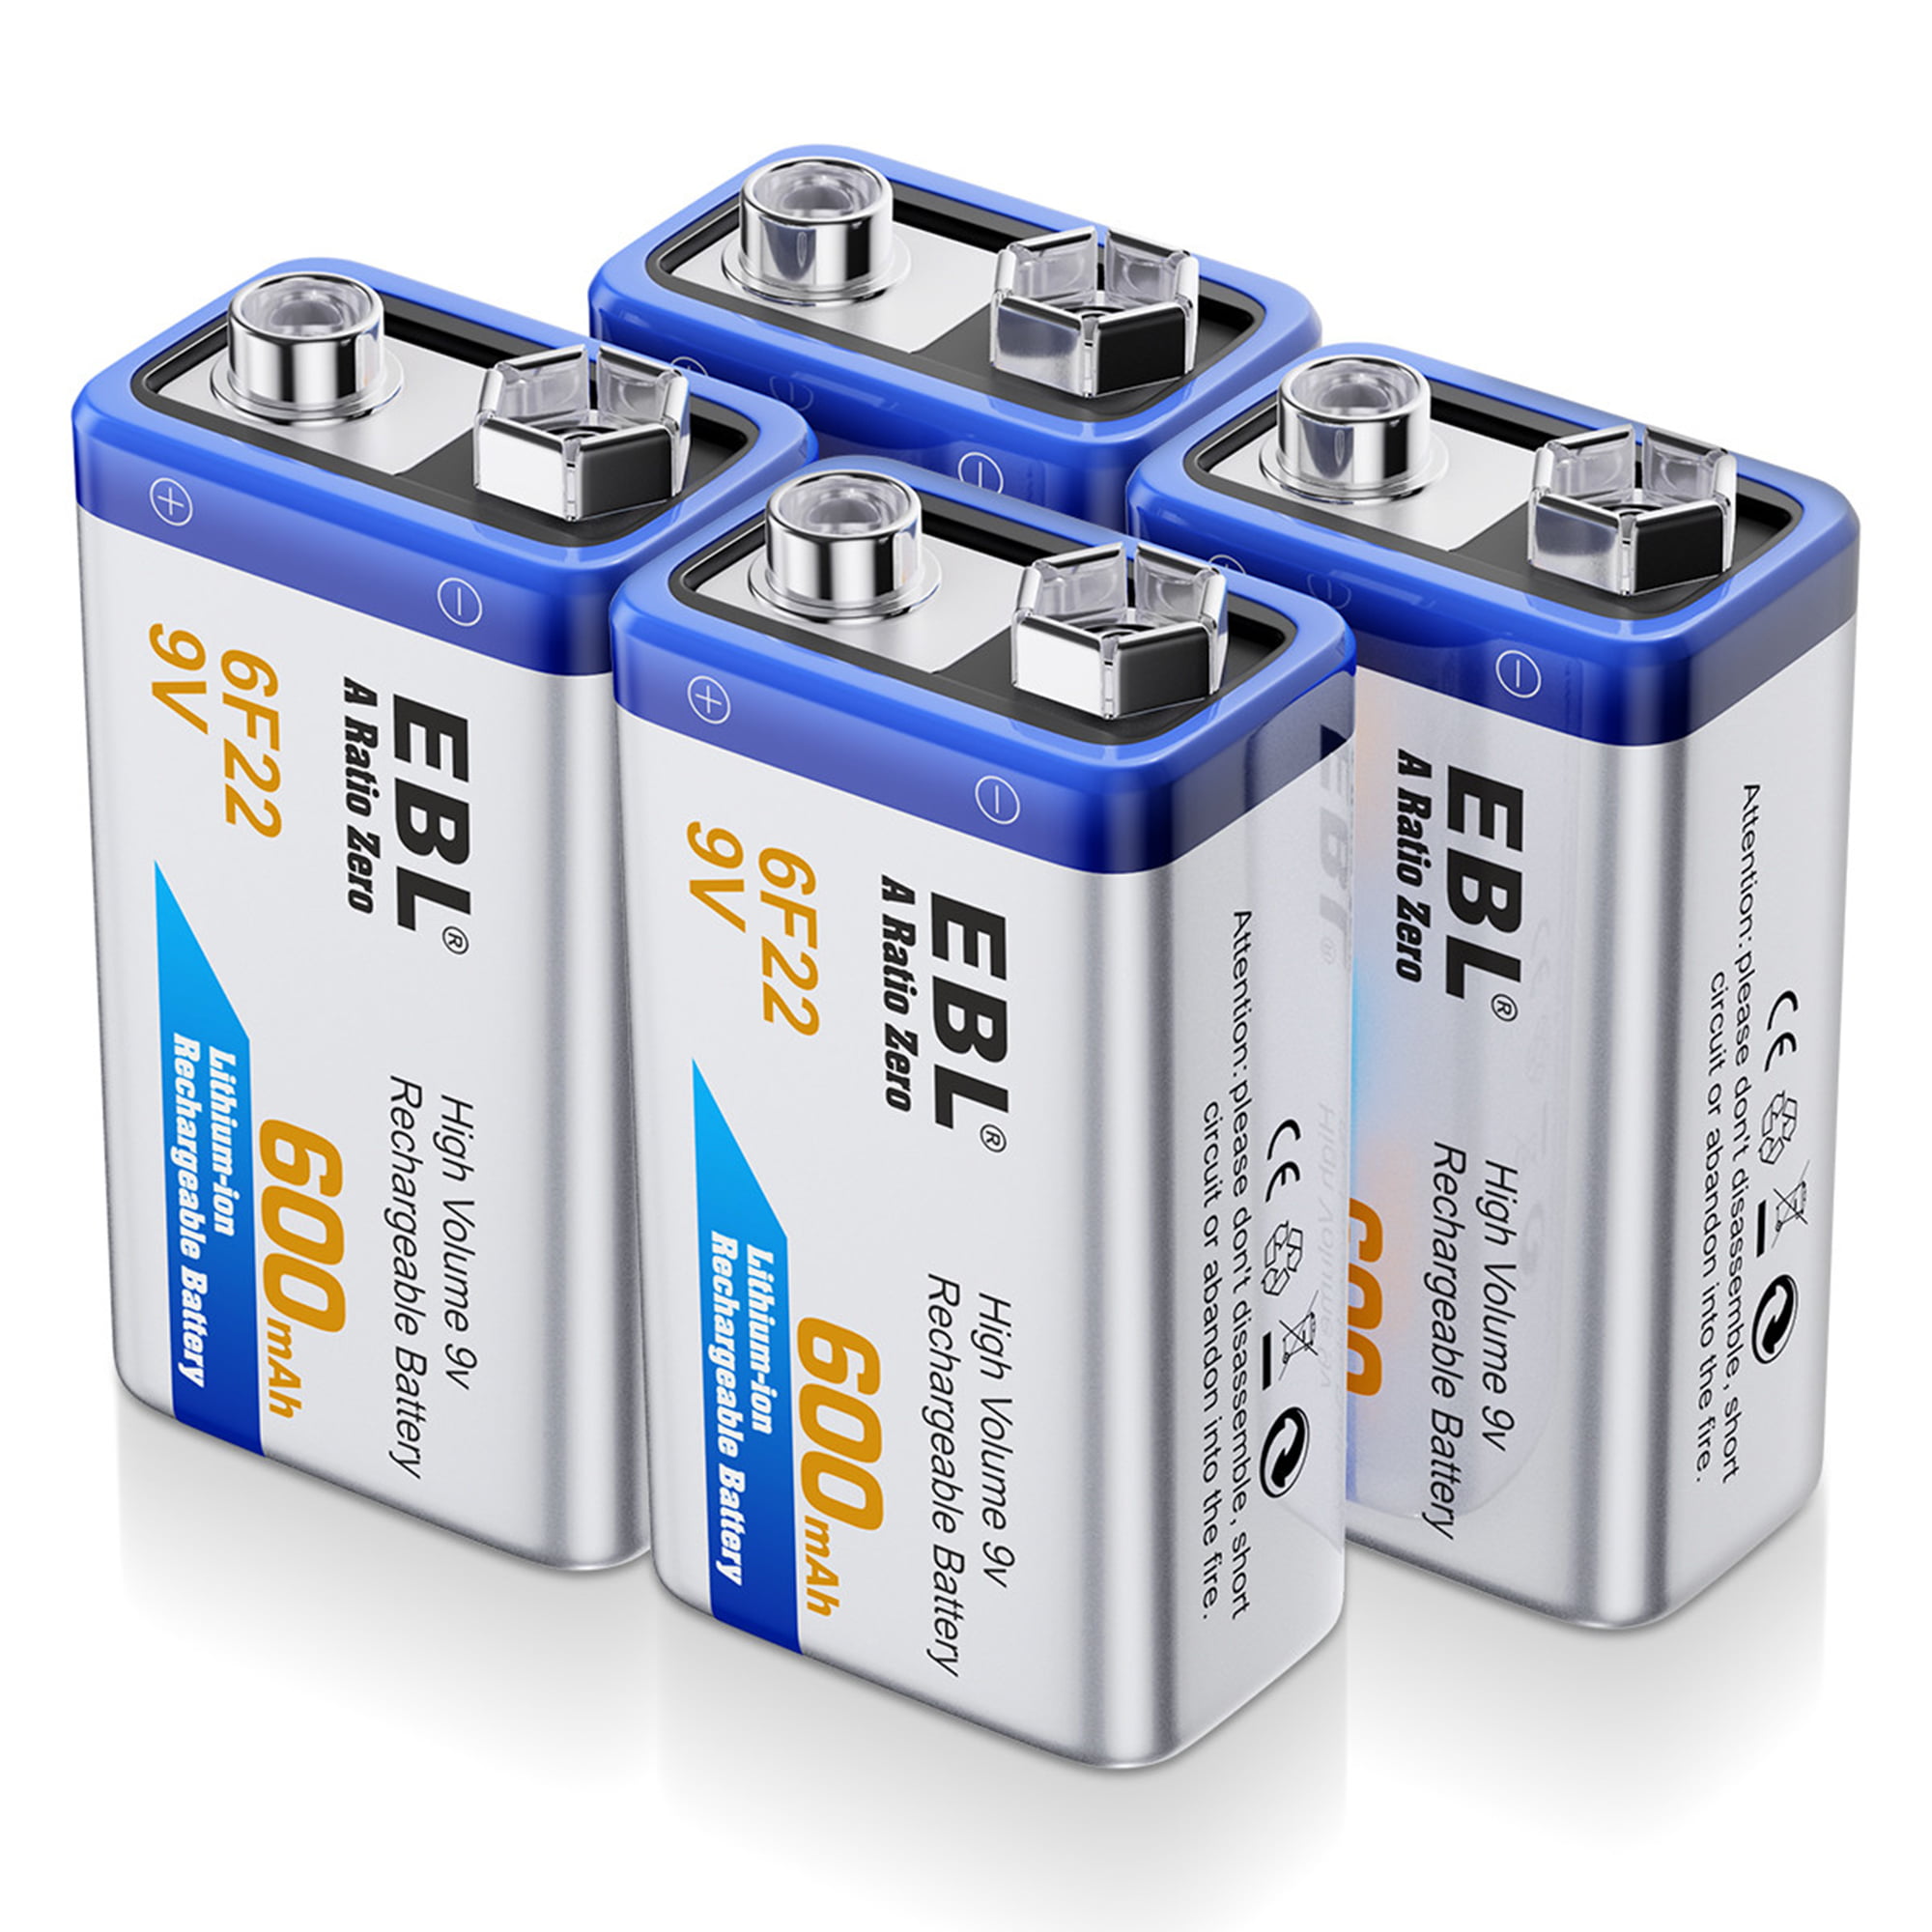 EBL 9V 6F22 Rechargeable Batteries 280/600mAh / AA AAA 9V DC Wall Charger  Lot